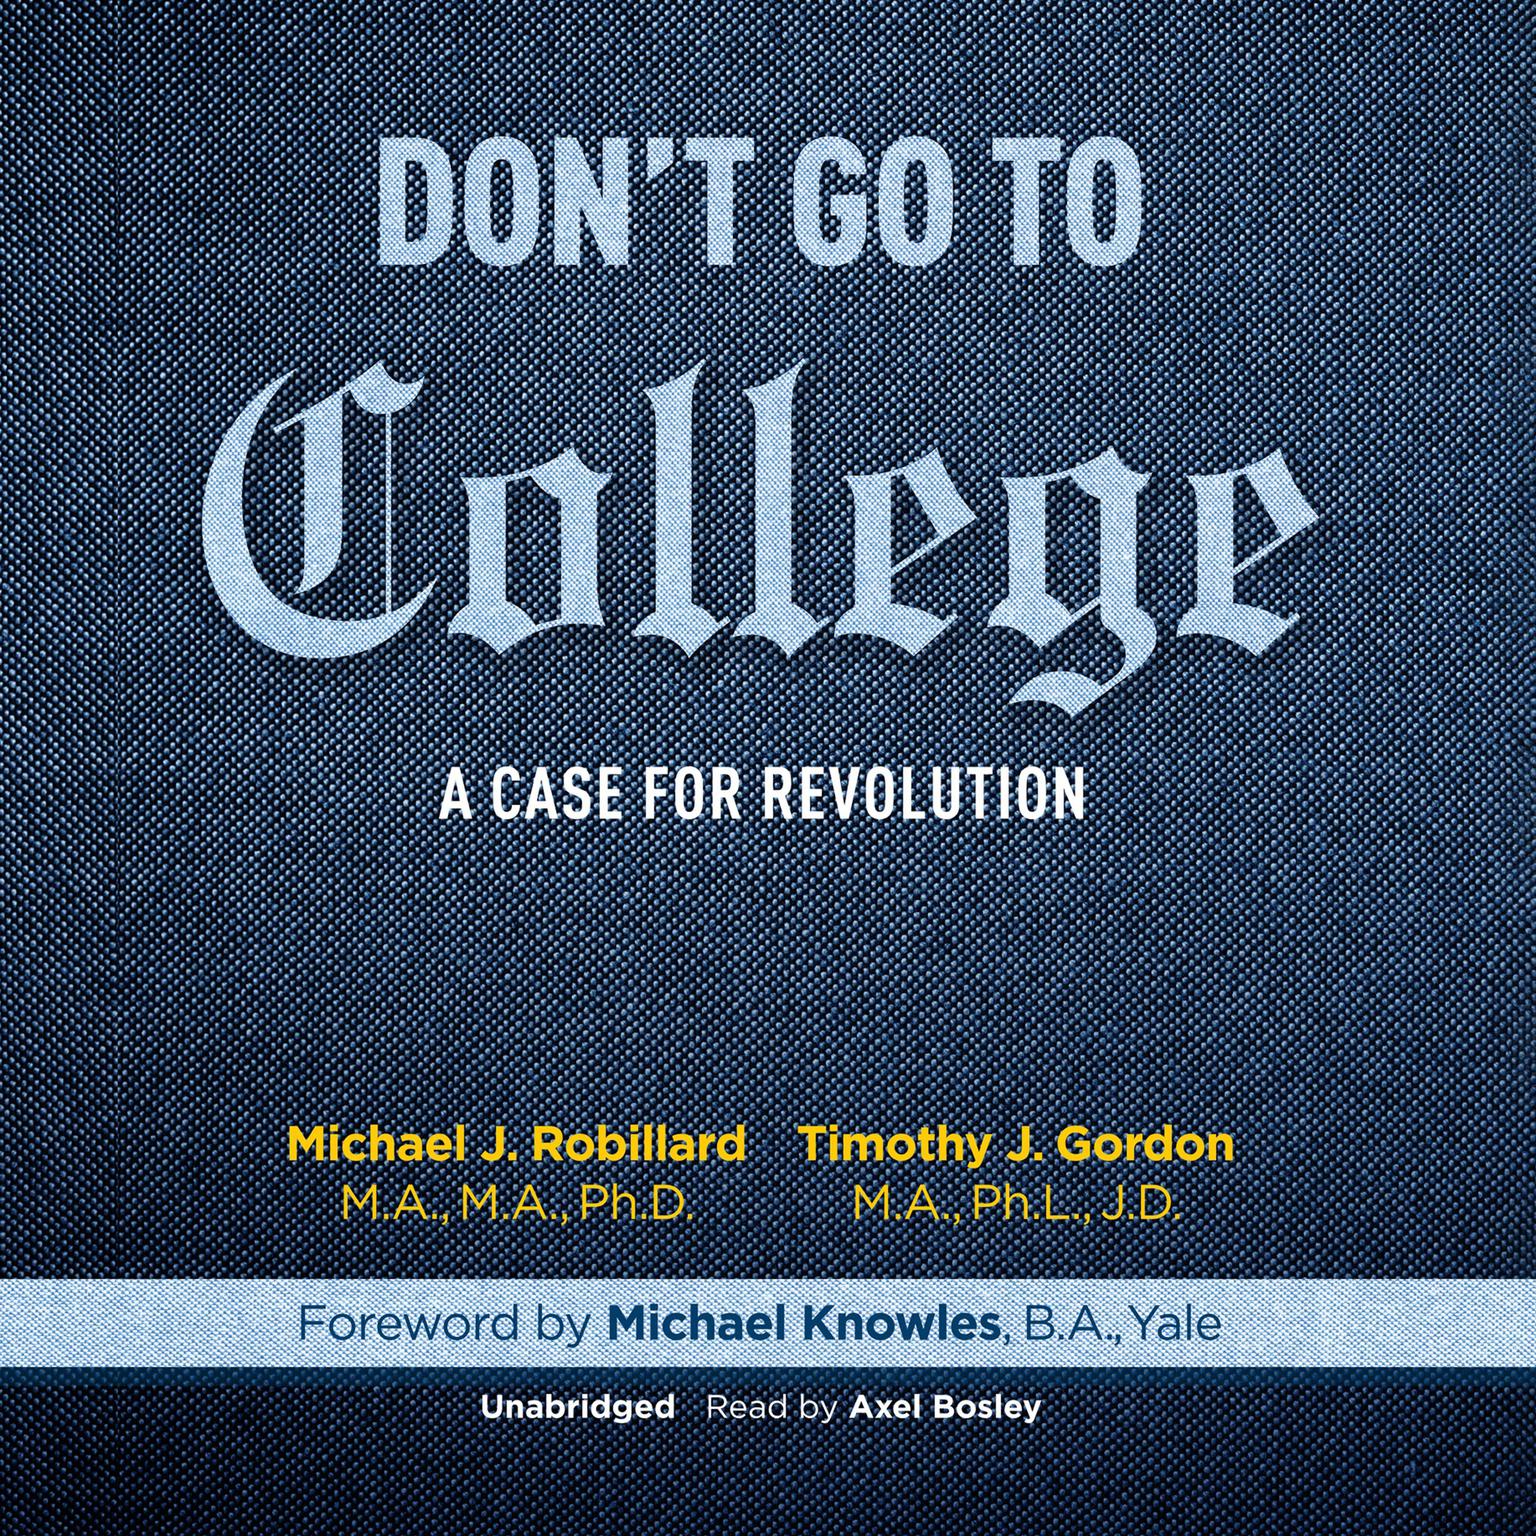 Dont Go to College: A Case for Revolution Audiobook, by Michael J. Robillard